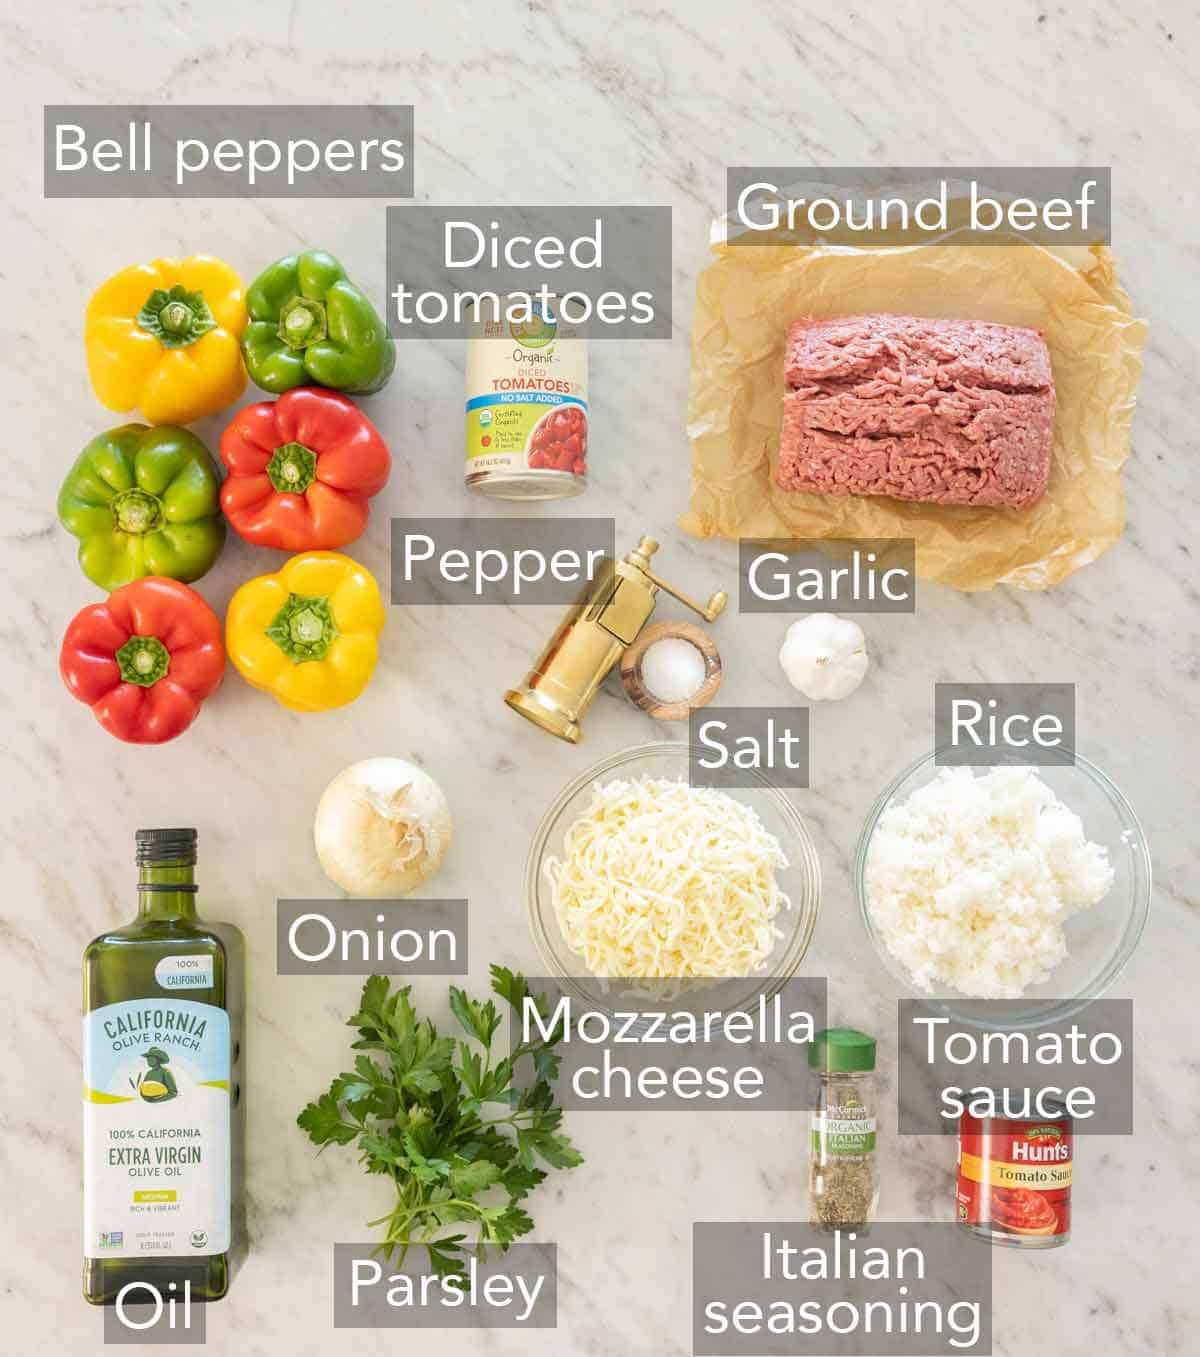 Ingredients needed to make stuffed peppers